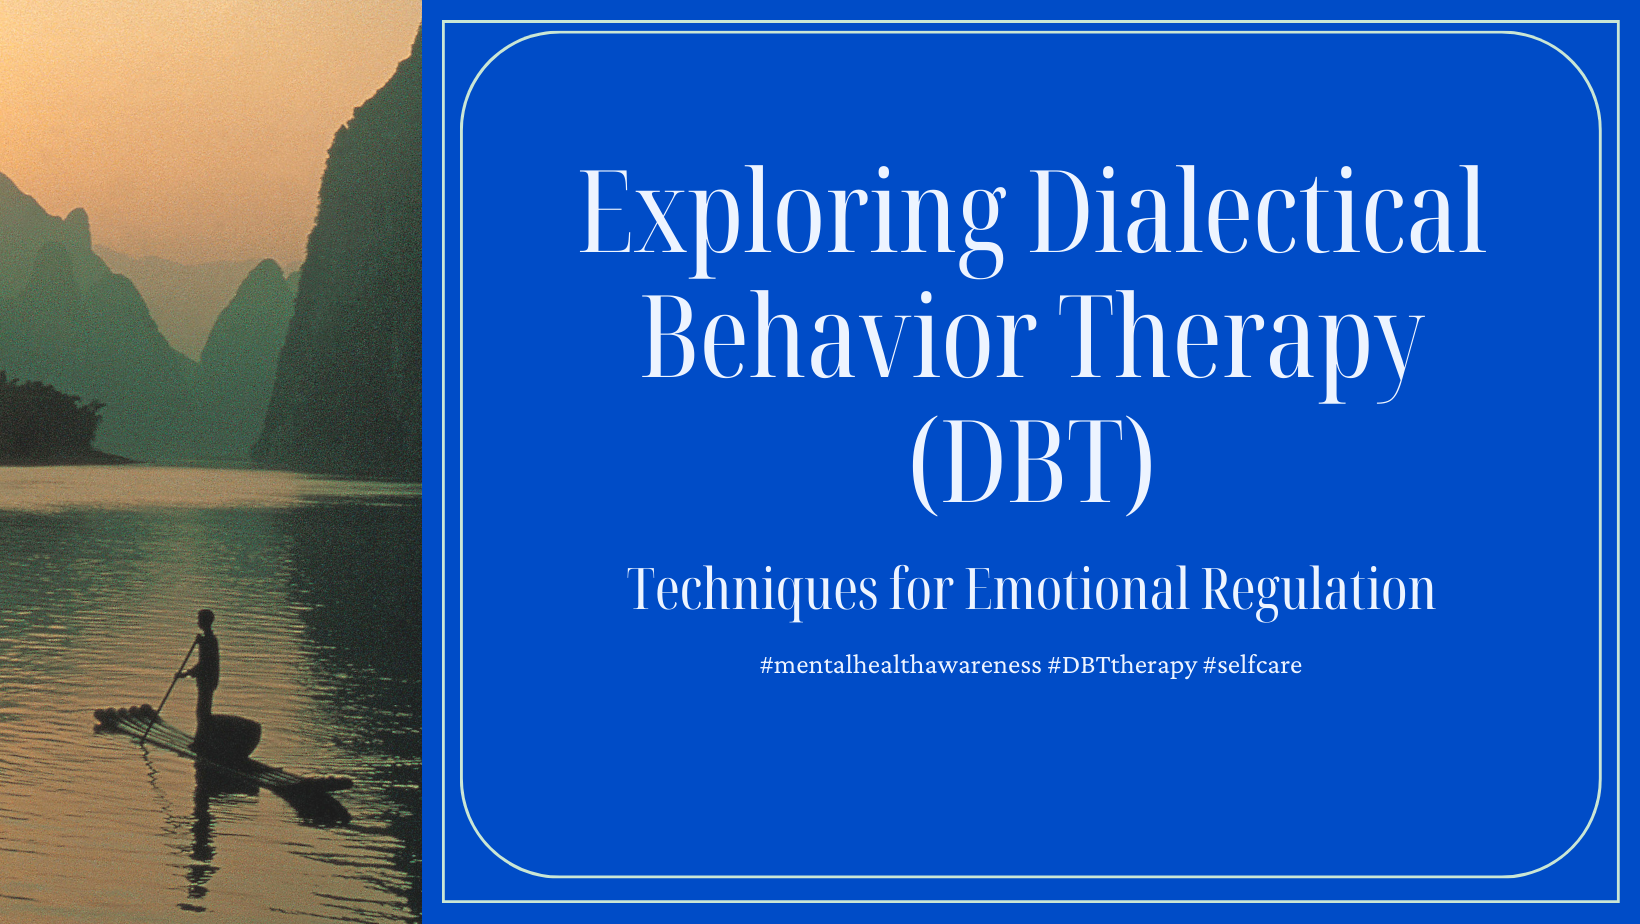 Exploring Dialectical Behavior Therapy (DBT): Techniques for Emotional Regulation